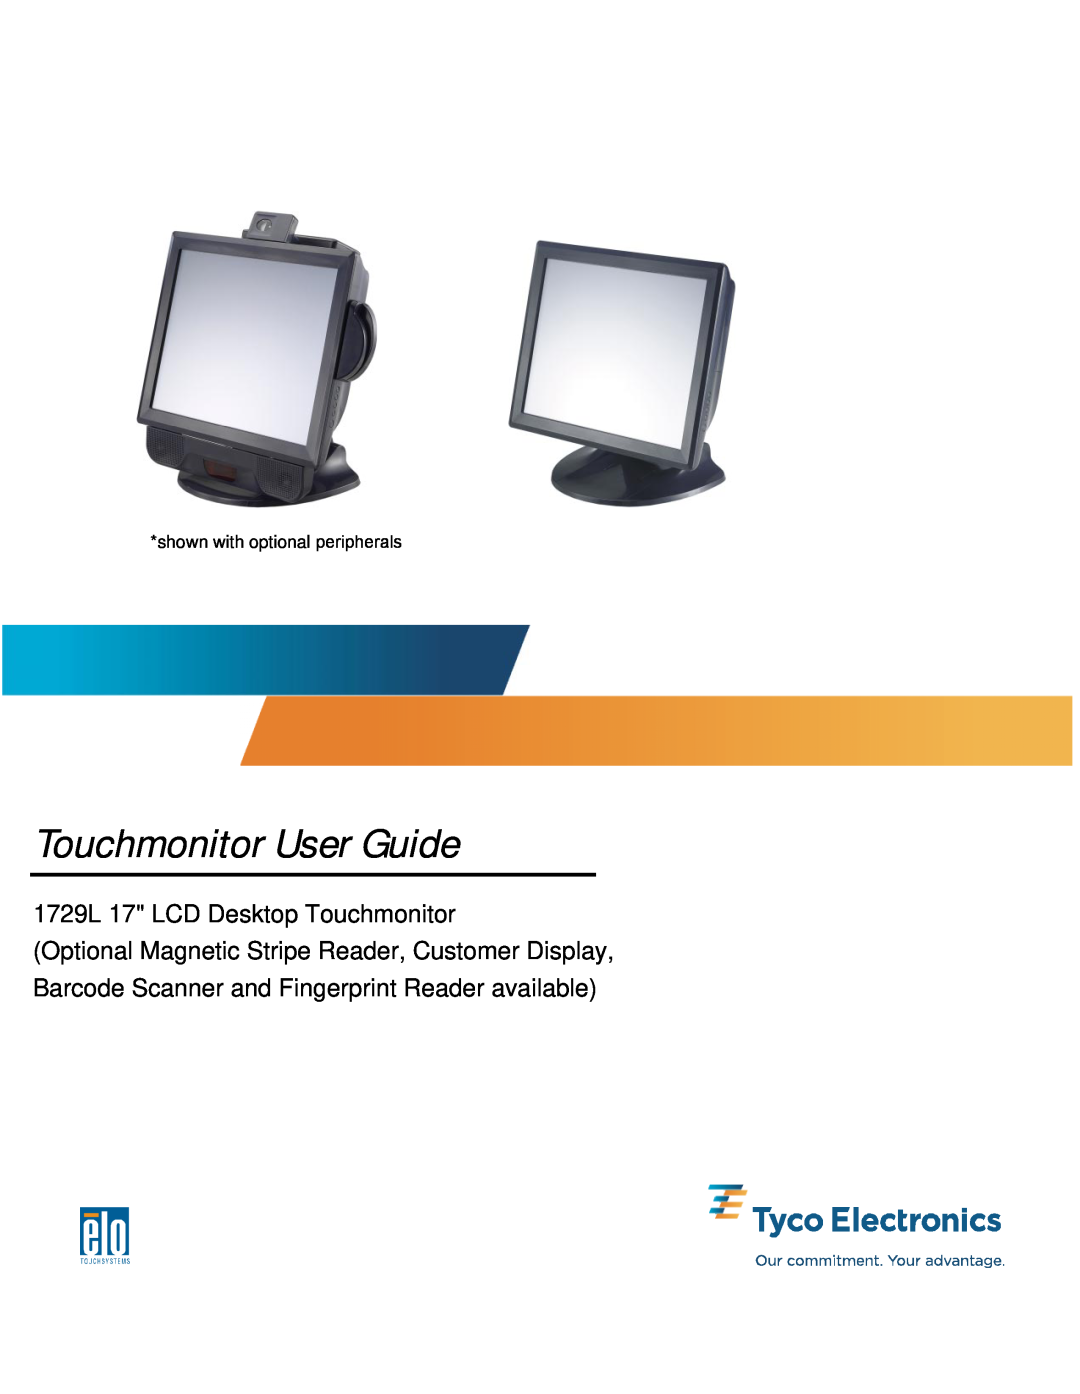 Elo TouchSystems manual Touchmonitor User Guide, 1729L 17 LCD Desktop Touchmonitor, shown with optional peripherals 